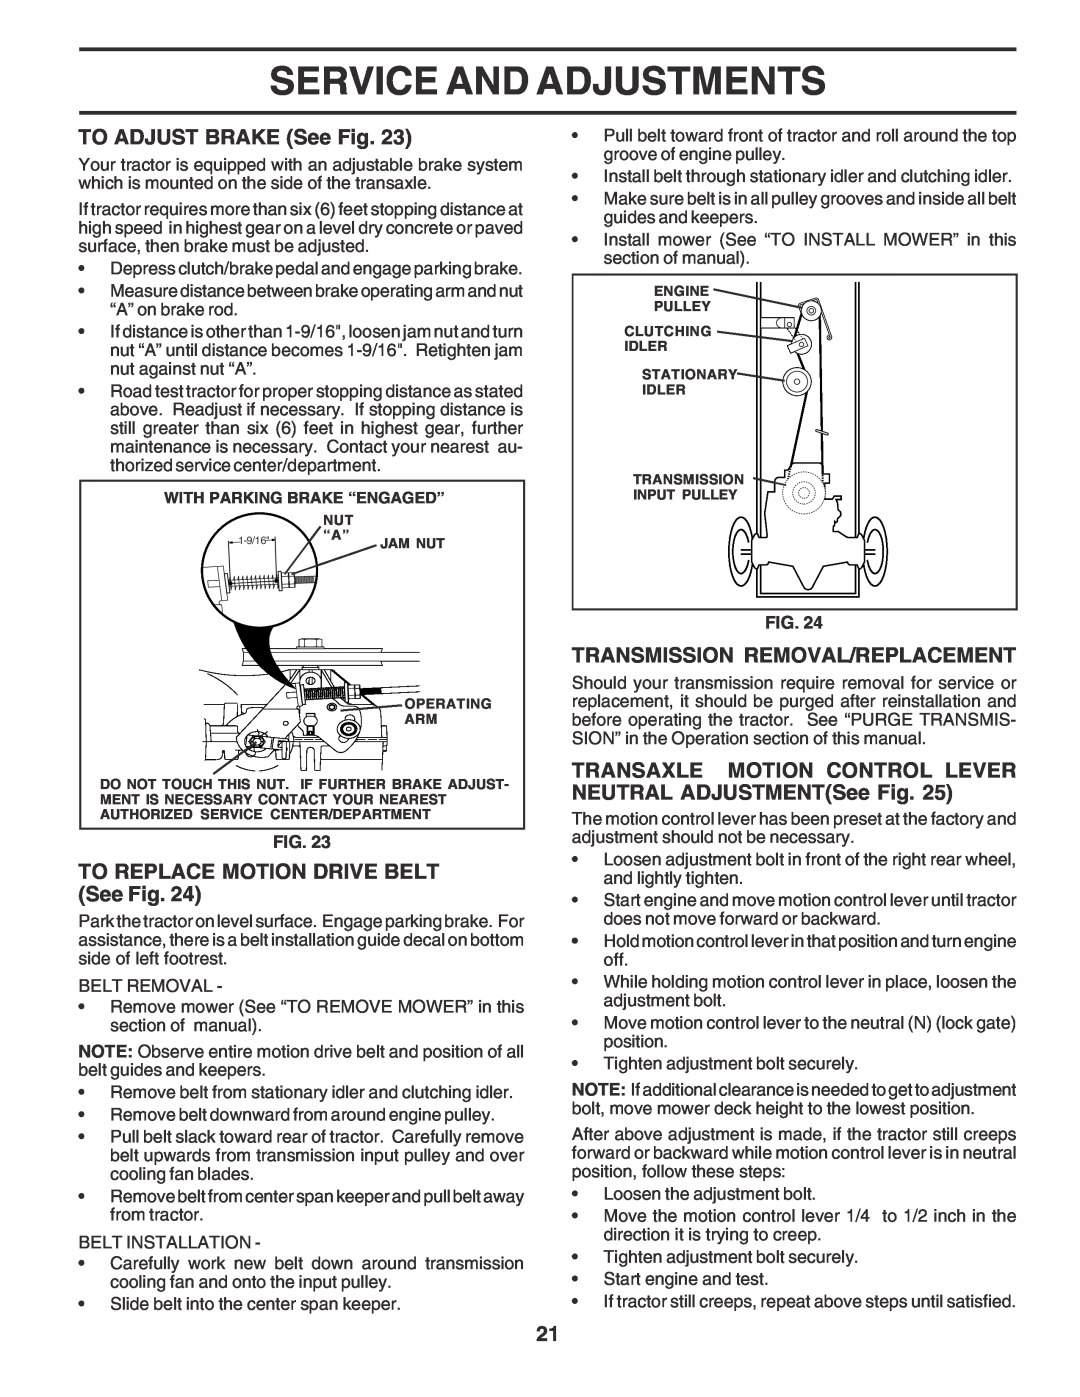 Poulan 183041 owner manual TO ADJUST BRAKE See Fig, TO REPLACE MOTION DRIVE BELT See Fig, Transmission Removal/Replacement 